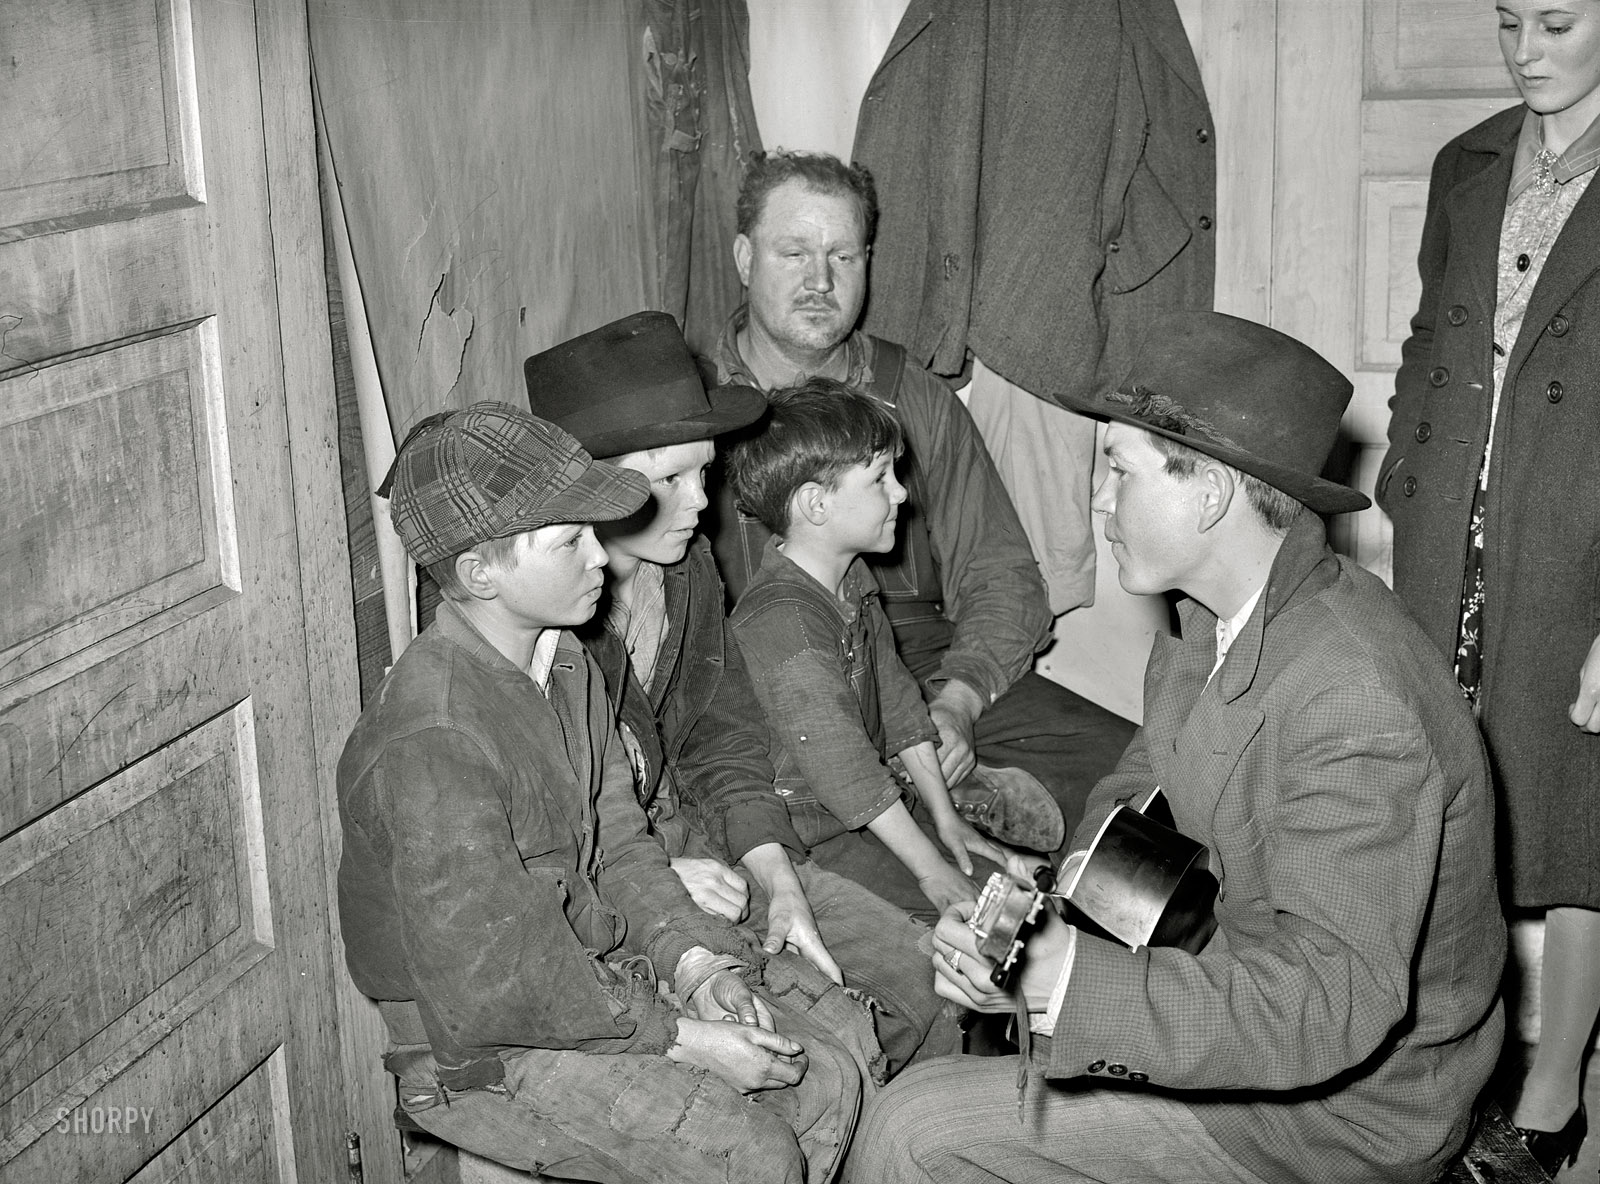 February 1940. "Farm boys at play party in McIntosh County, Oklahoma." Safety negative by Russell Lee for the Farm Security Administration. View full size.